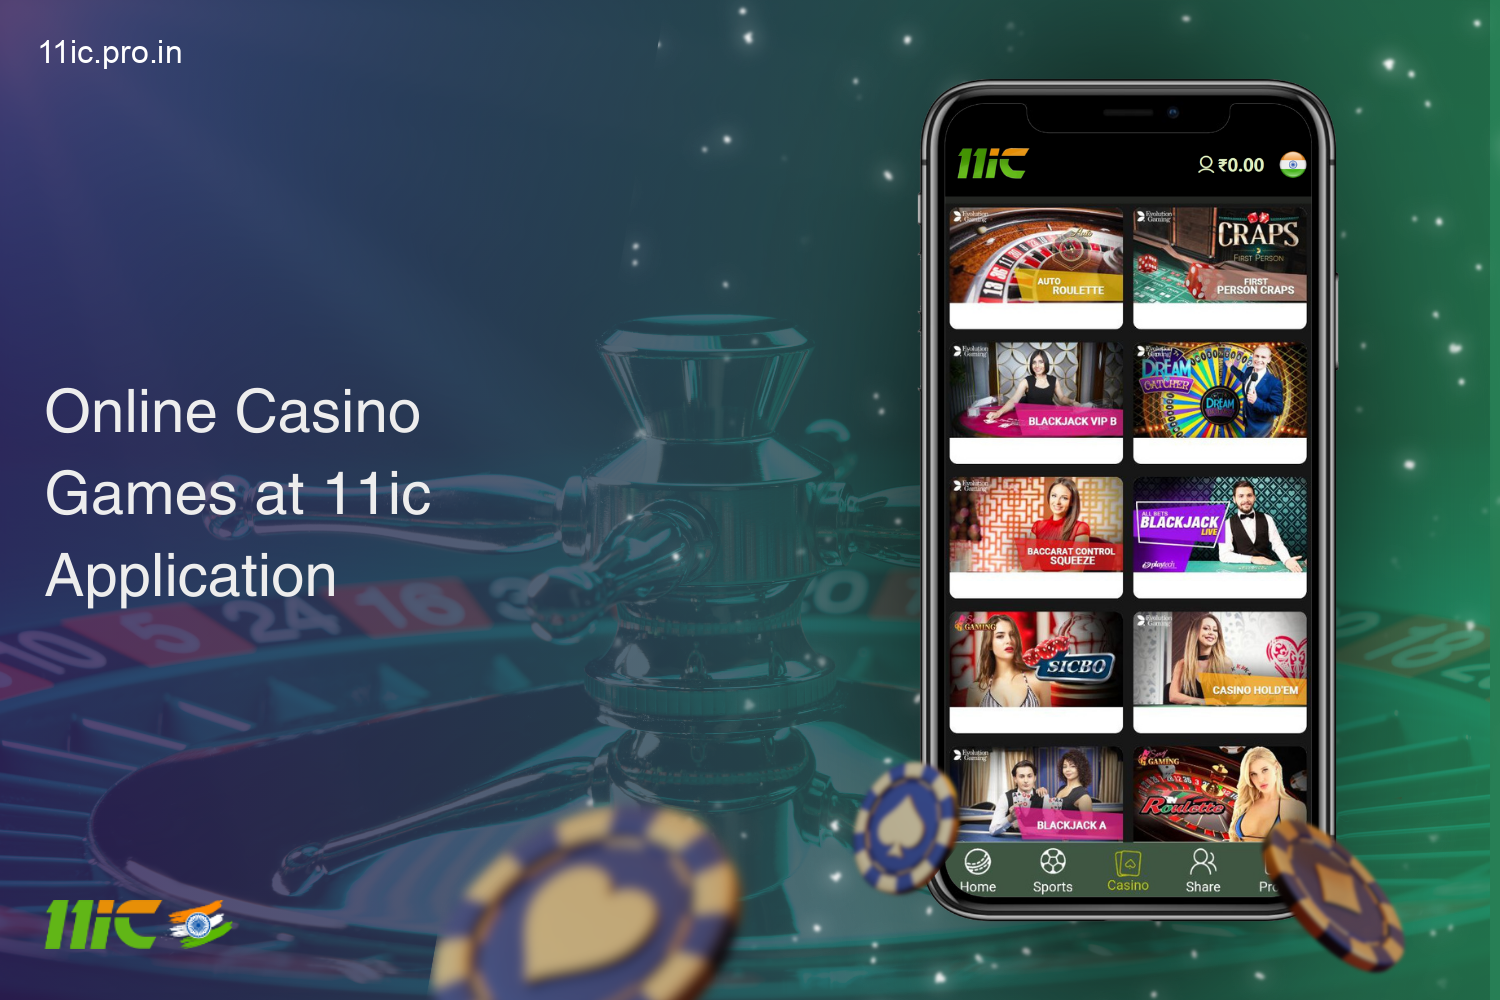 In the 11ic mobile app, Indian users have access to a wide library of games in the casino section